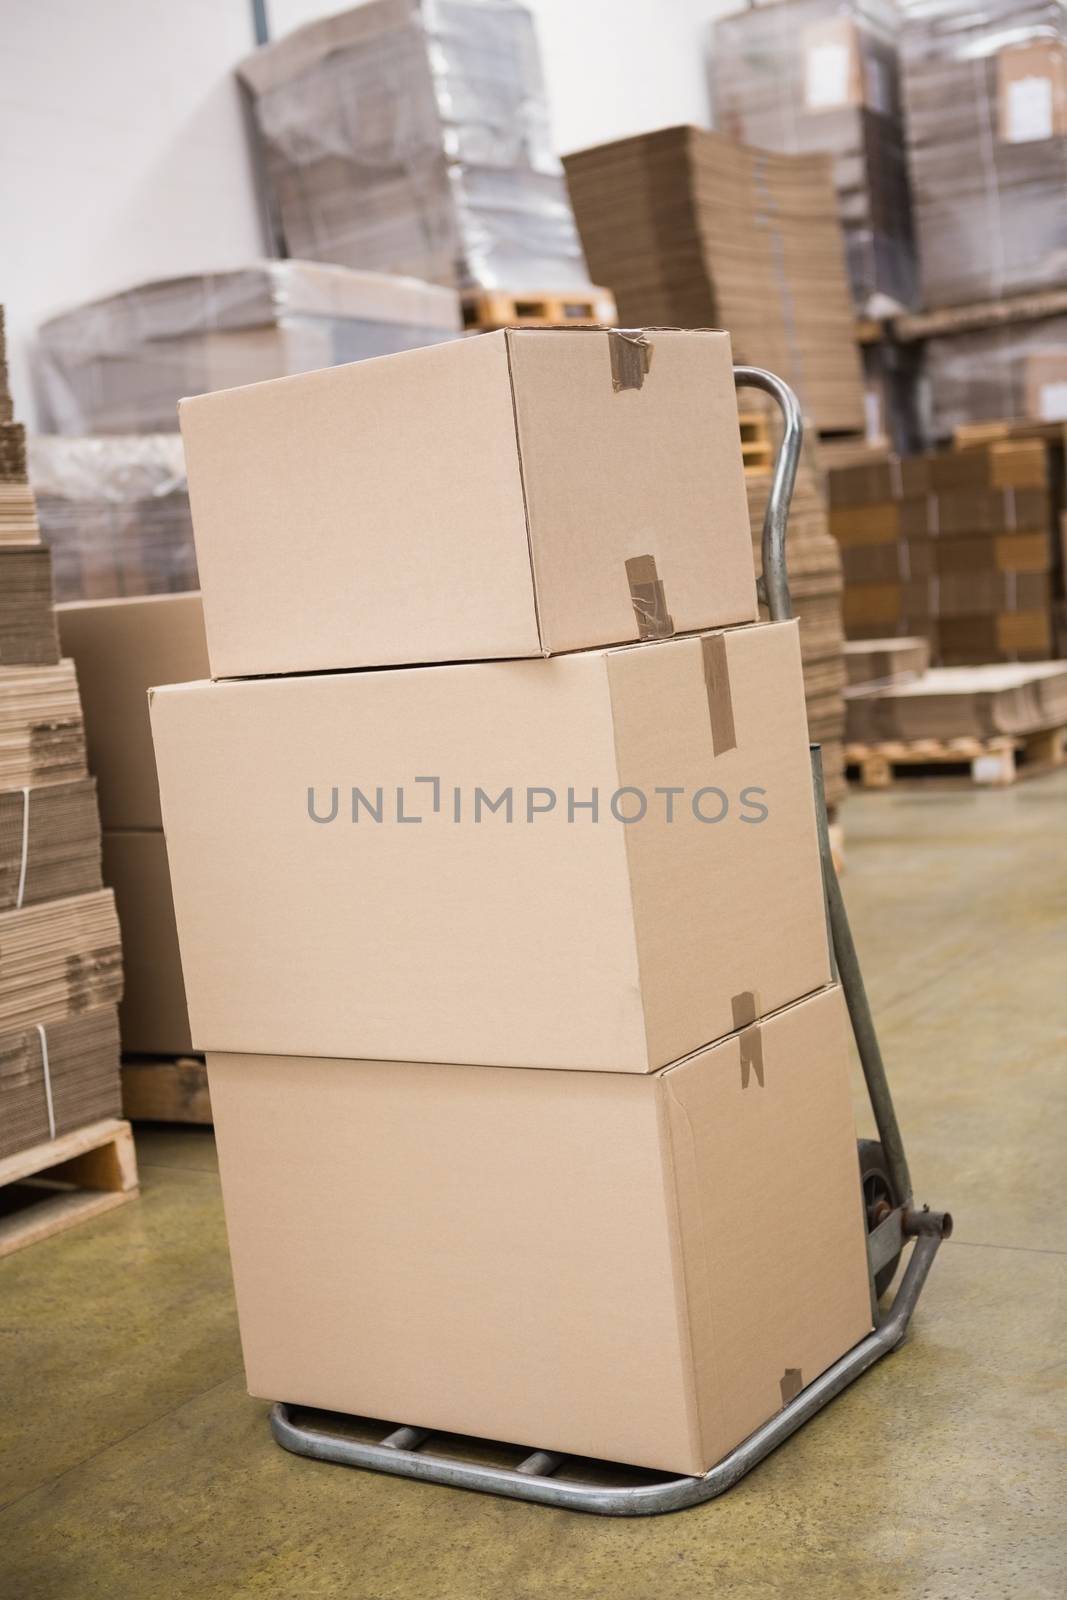 Boxes on trolley in warehouse by Wavebreakmedia